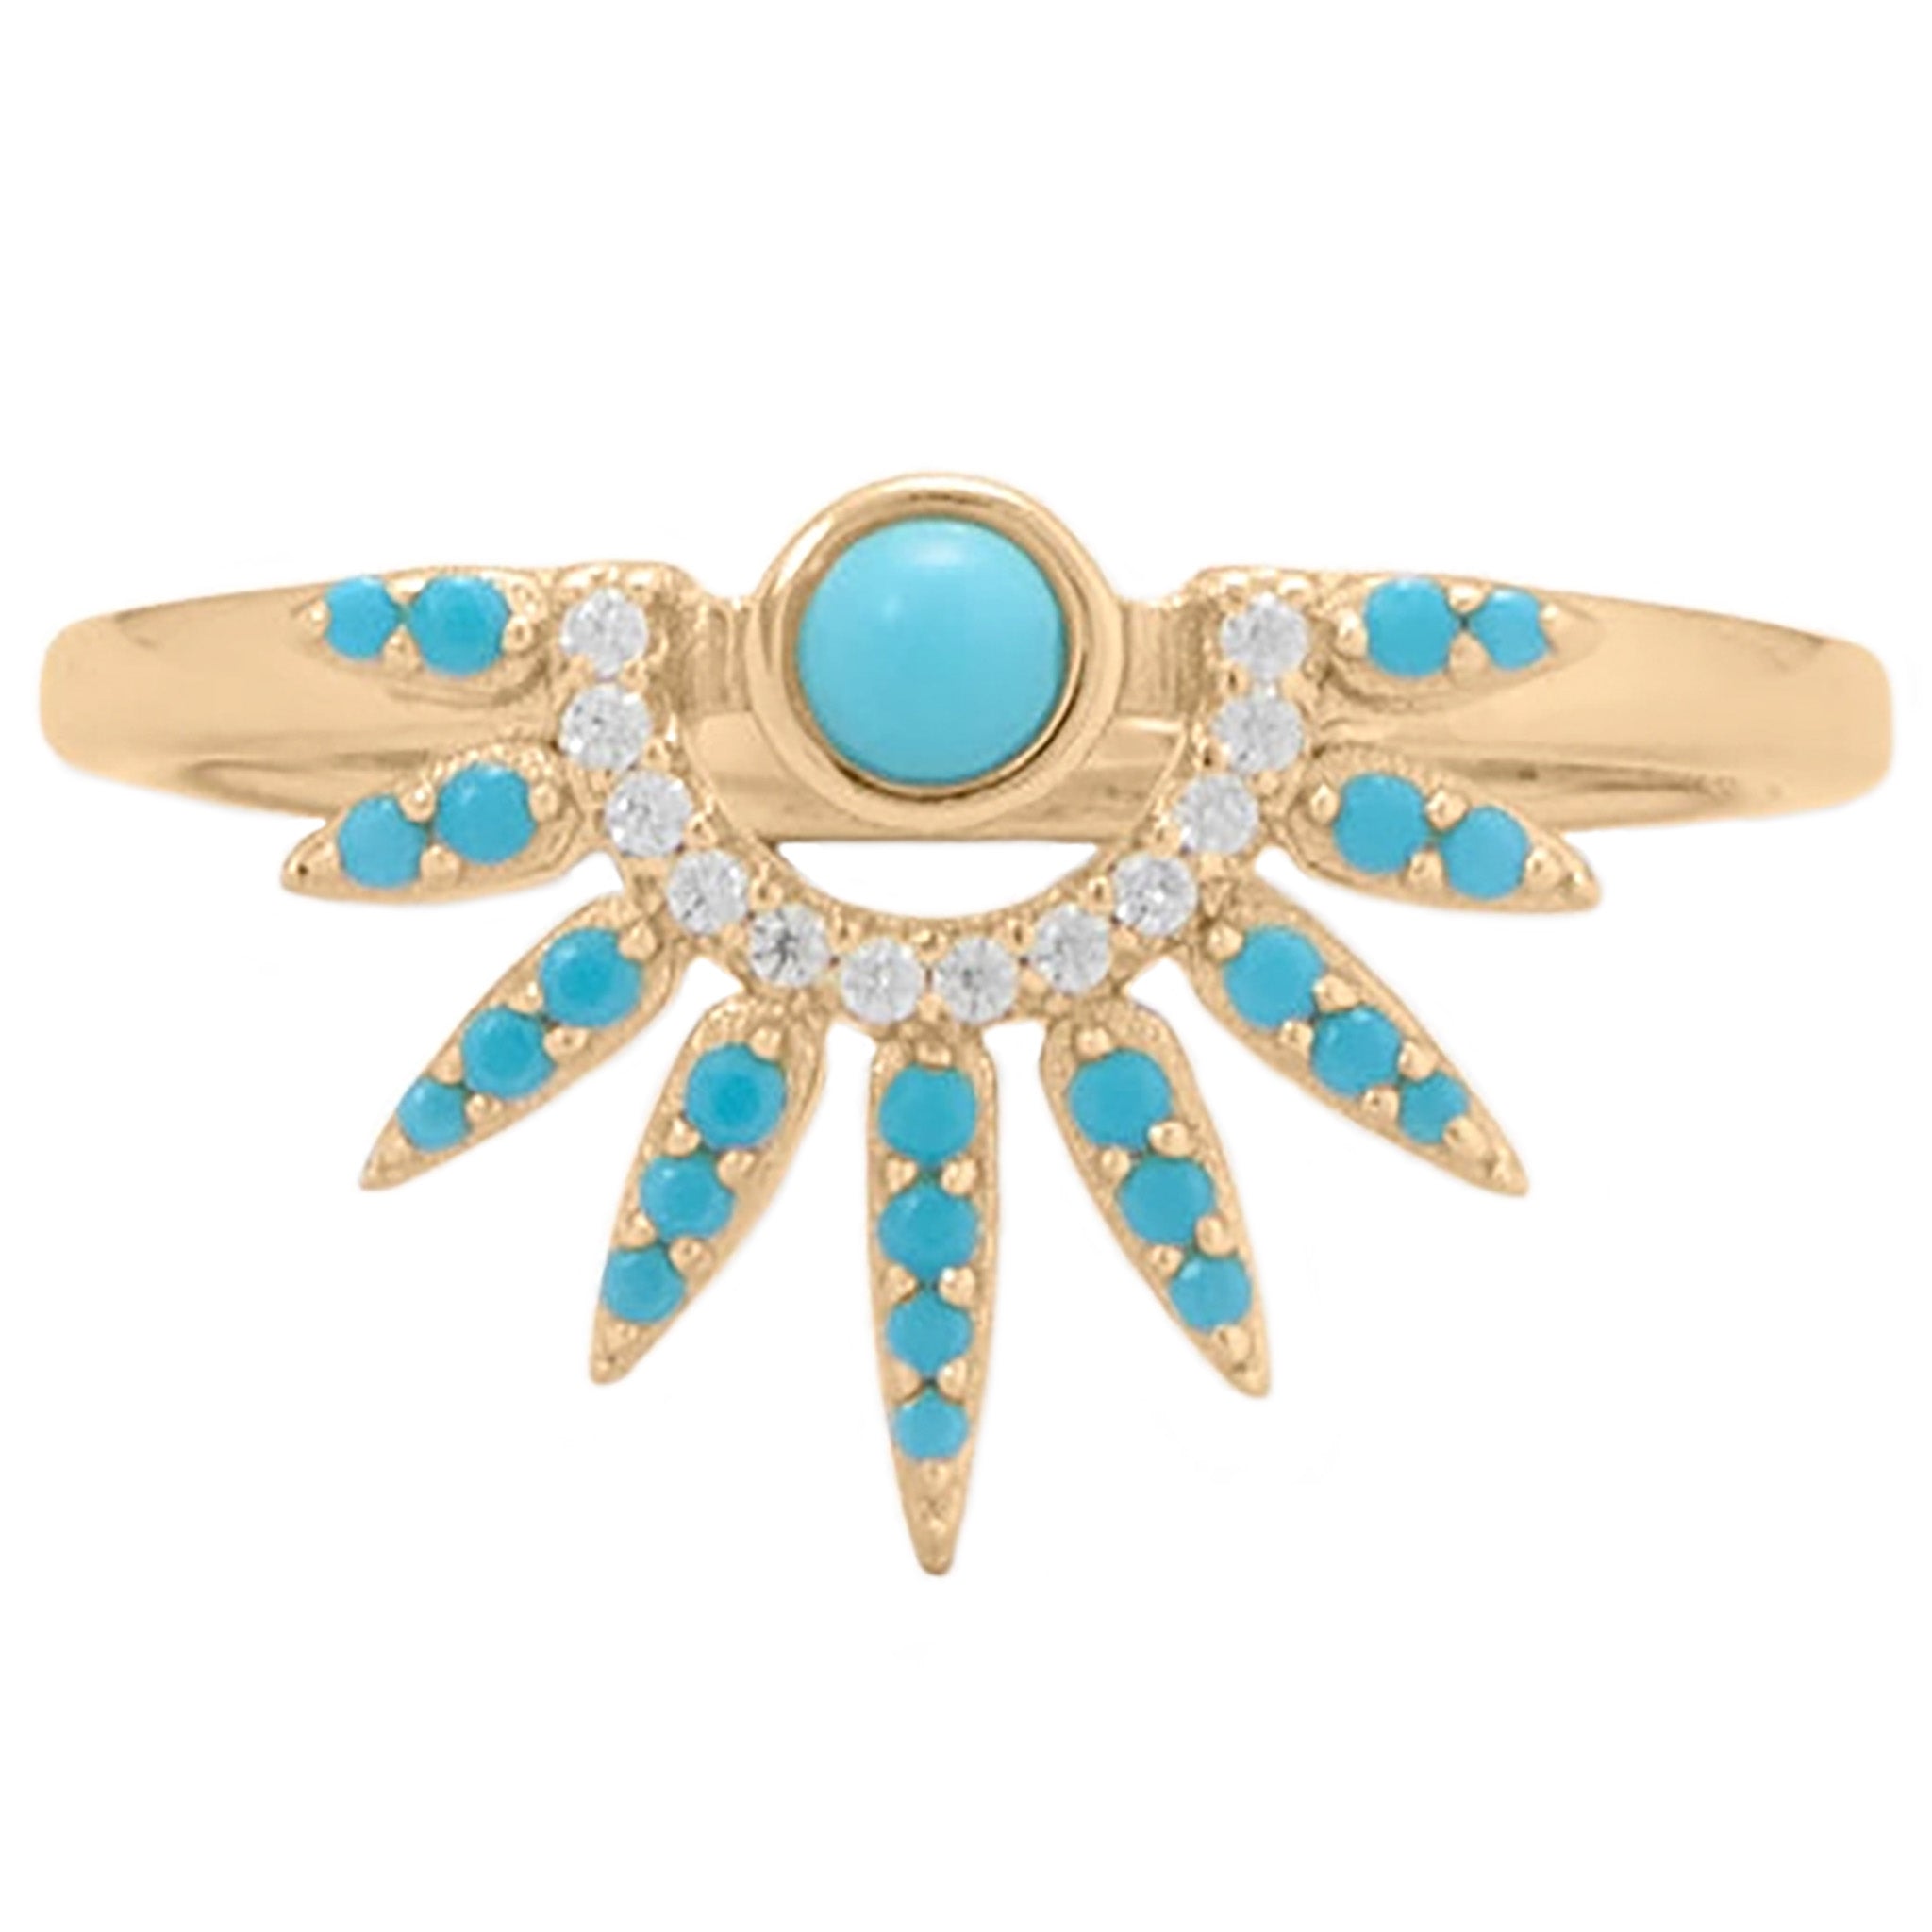 Turquoise and Zirconia Sunray Ring